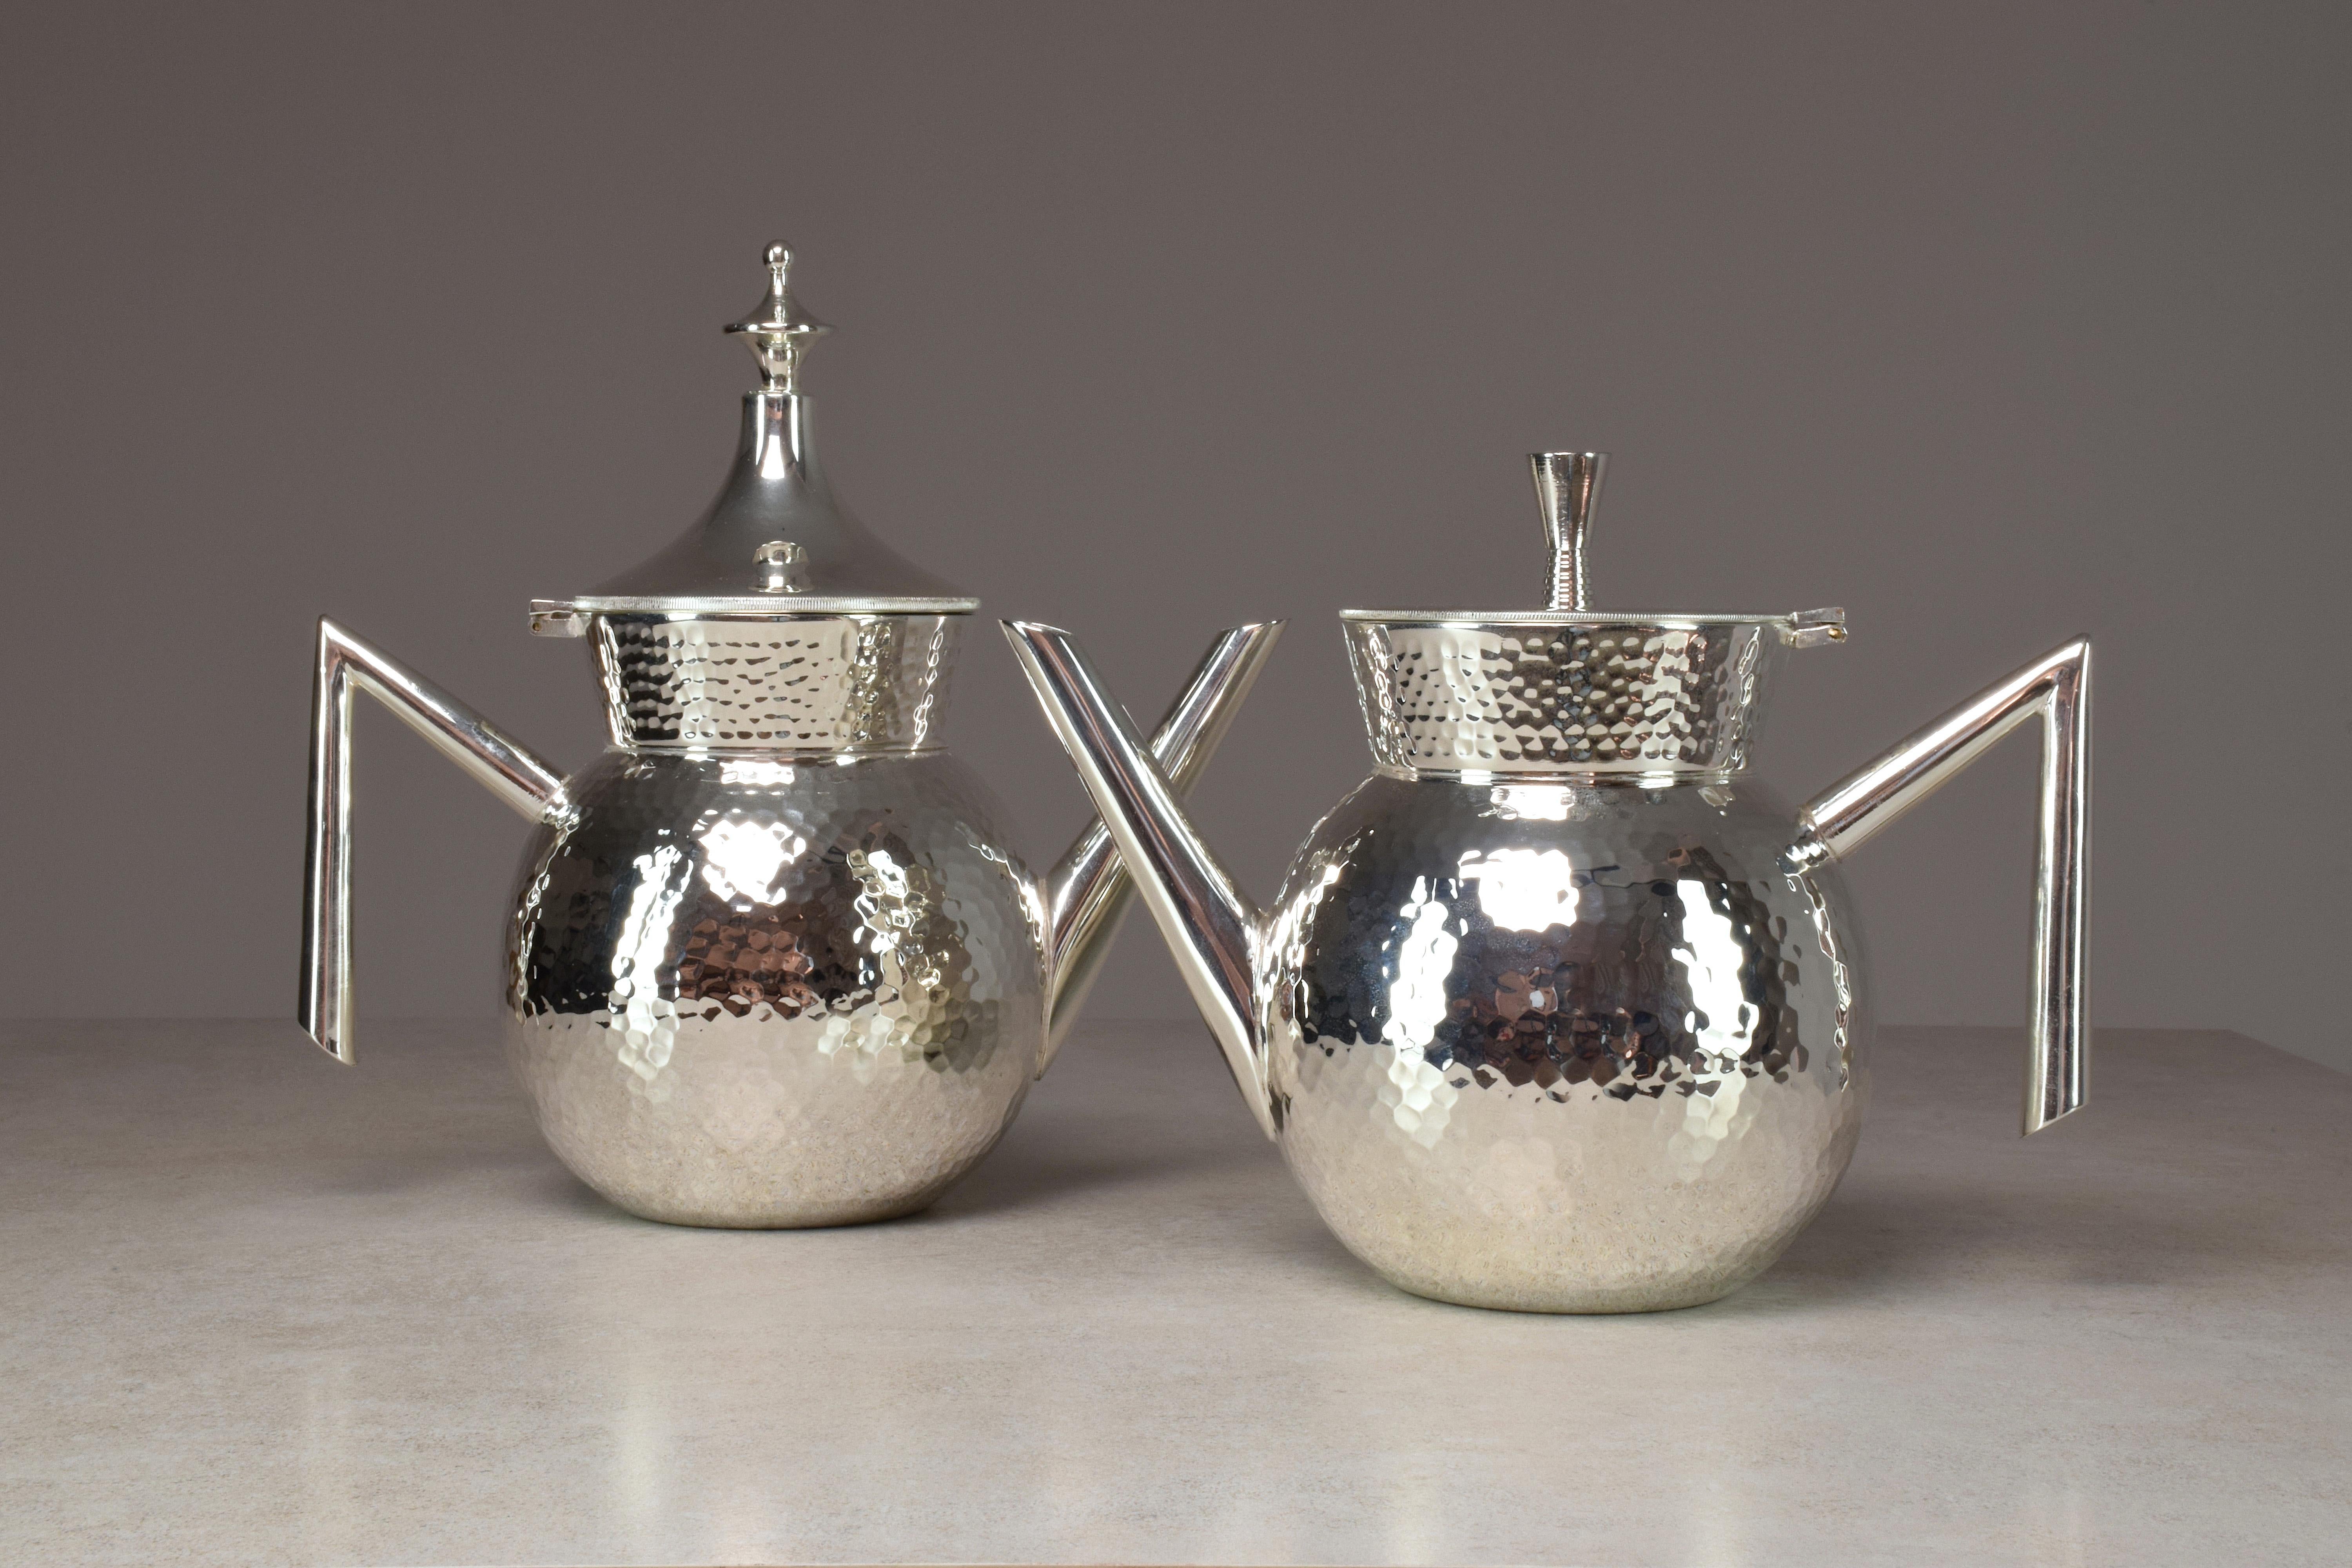 Modern Almis-H Contemporary Moroccan Teapot by Jonathan Amar